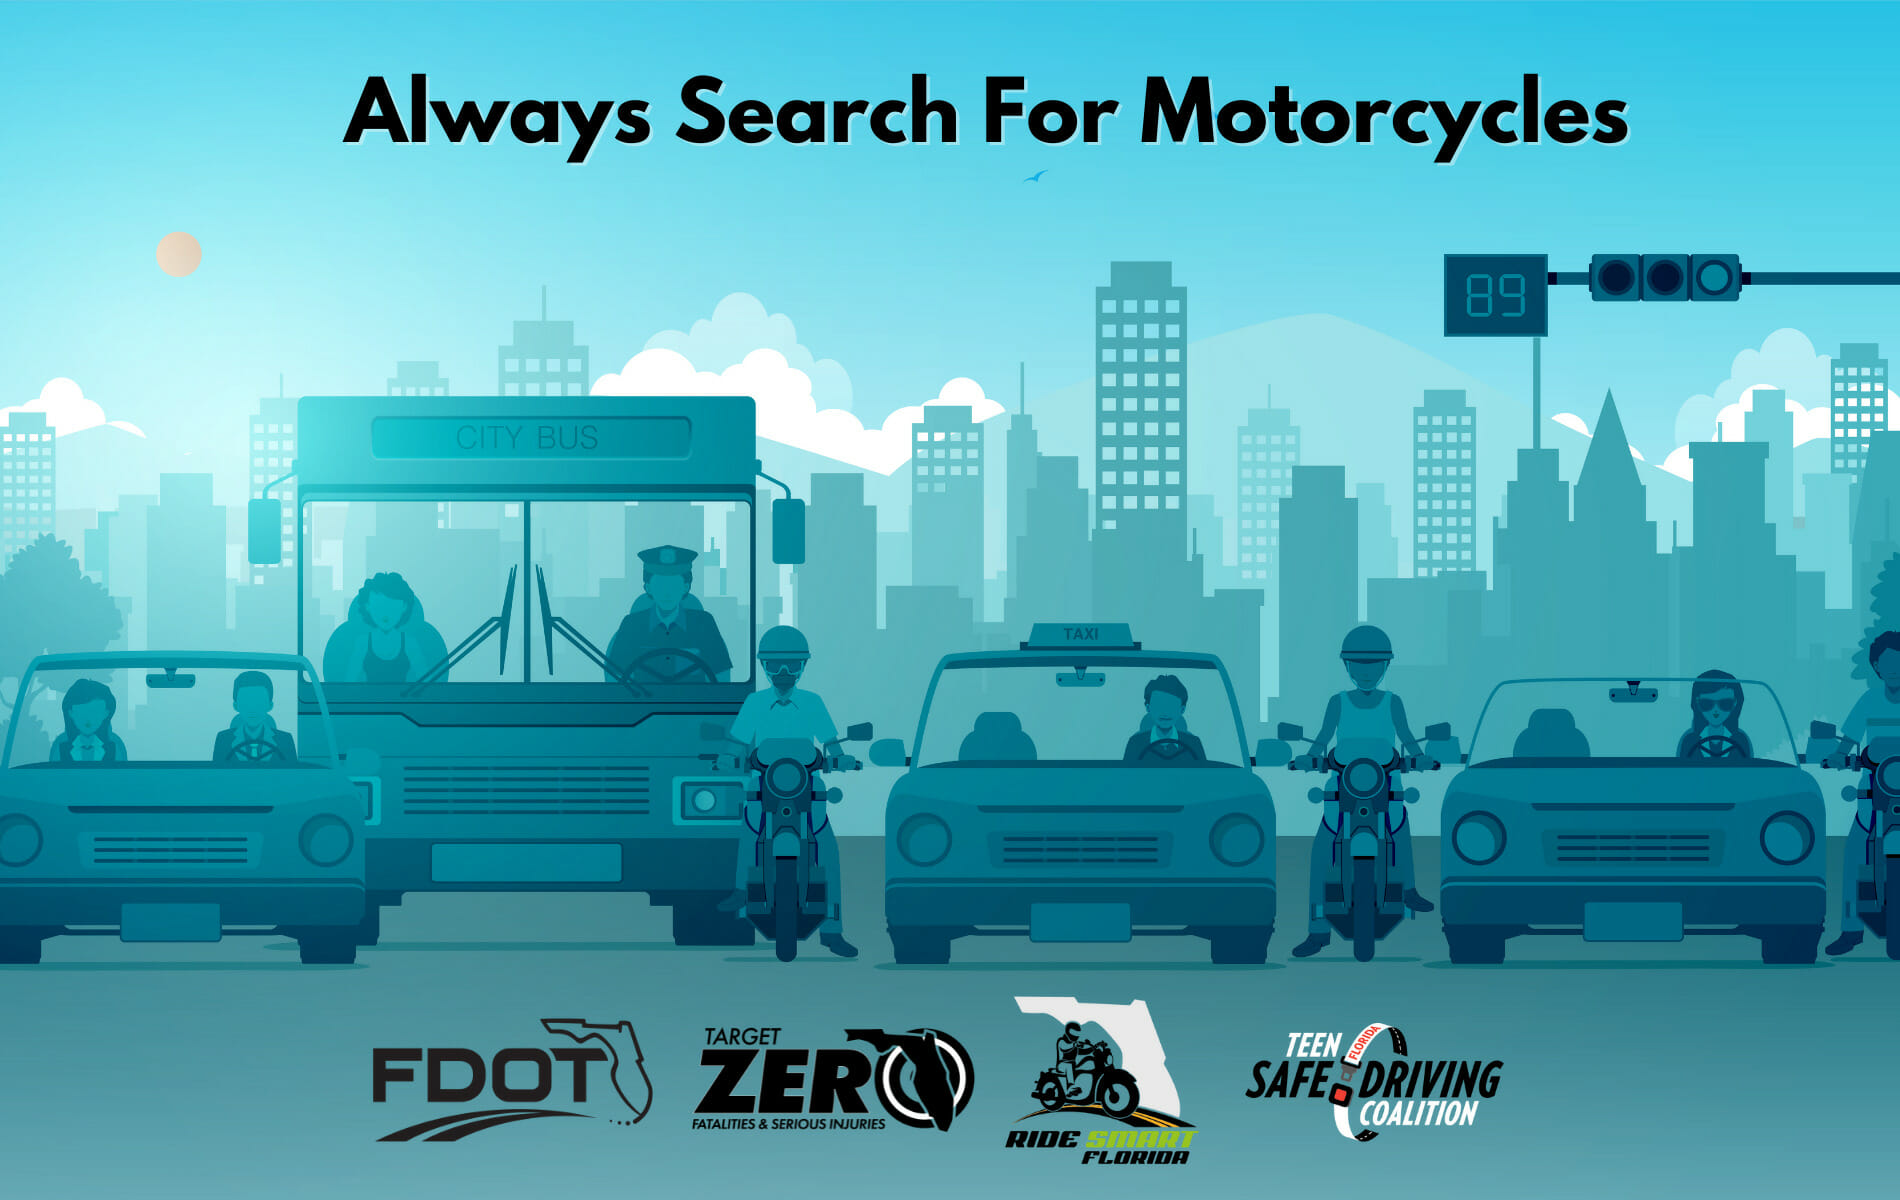 Always Search for Motorcyclists